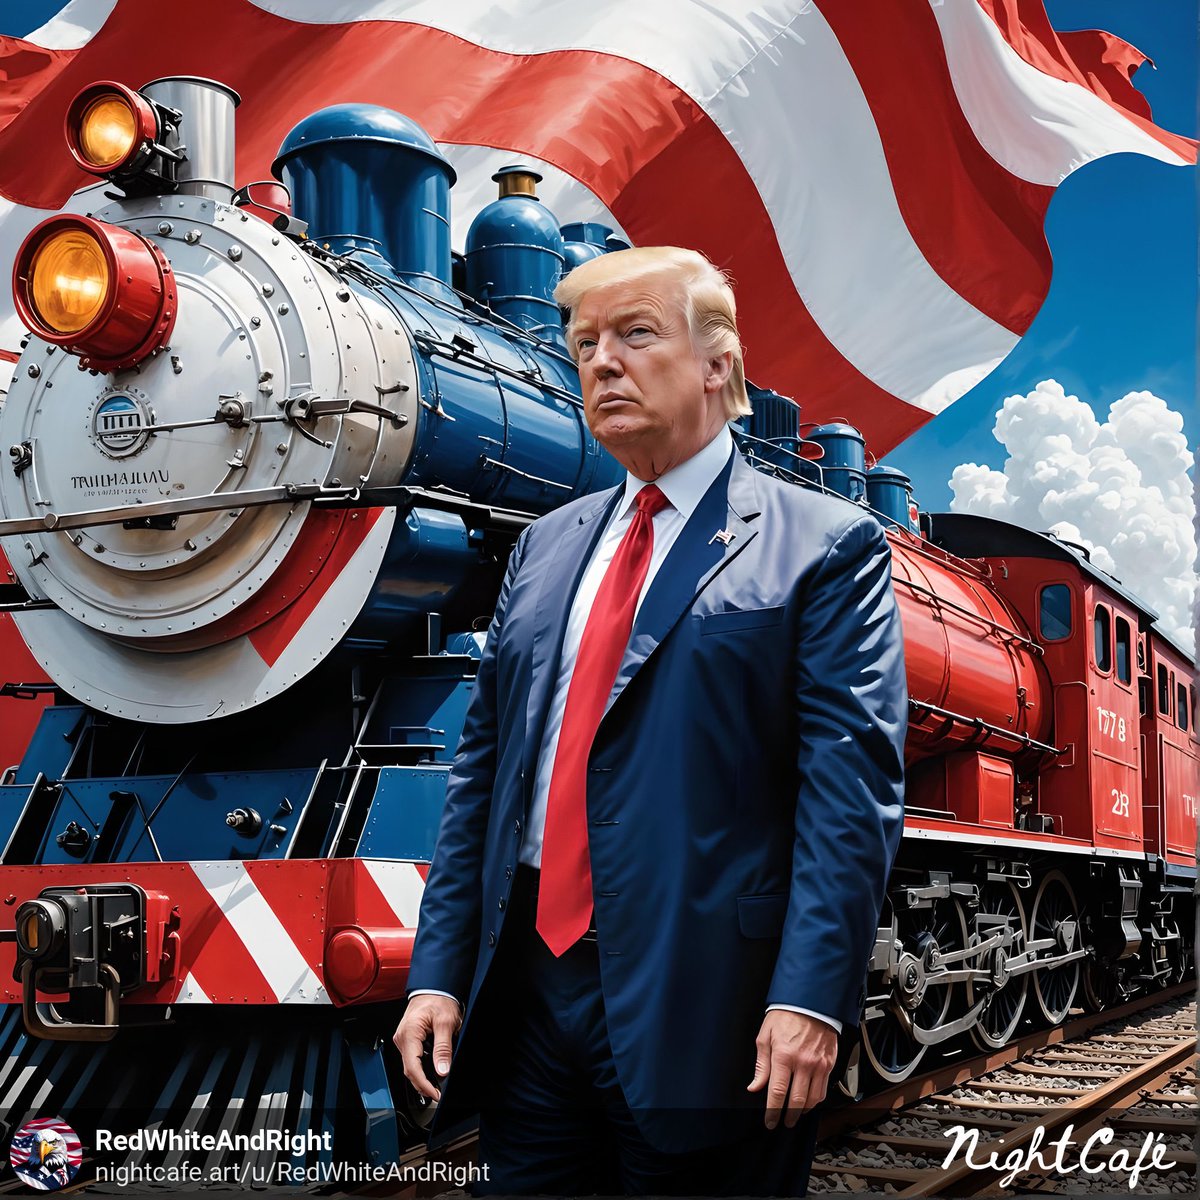 FRIDAY FOLLOW TRAIN!!! ALL ABOARD!!! 🚂 💨 🚂 💨 🚂 💨 💨 PLEASE REPOST & FOLLOW BACK ALL PATRIOTS! 🇺🇸🇺🇸🇺🇸 COMMENT WITH YOUR HANDLE IN IT INCLUDE EMOJIS & MEMES ETC TO STAND OUT 🔥🔥🔥 GROW TOGETHER!!! 💪💪💪 LET’S GOOO!!! 🦅 #PatriotsUnite 🇺🇸